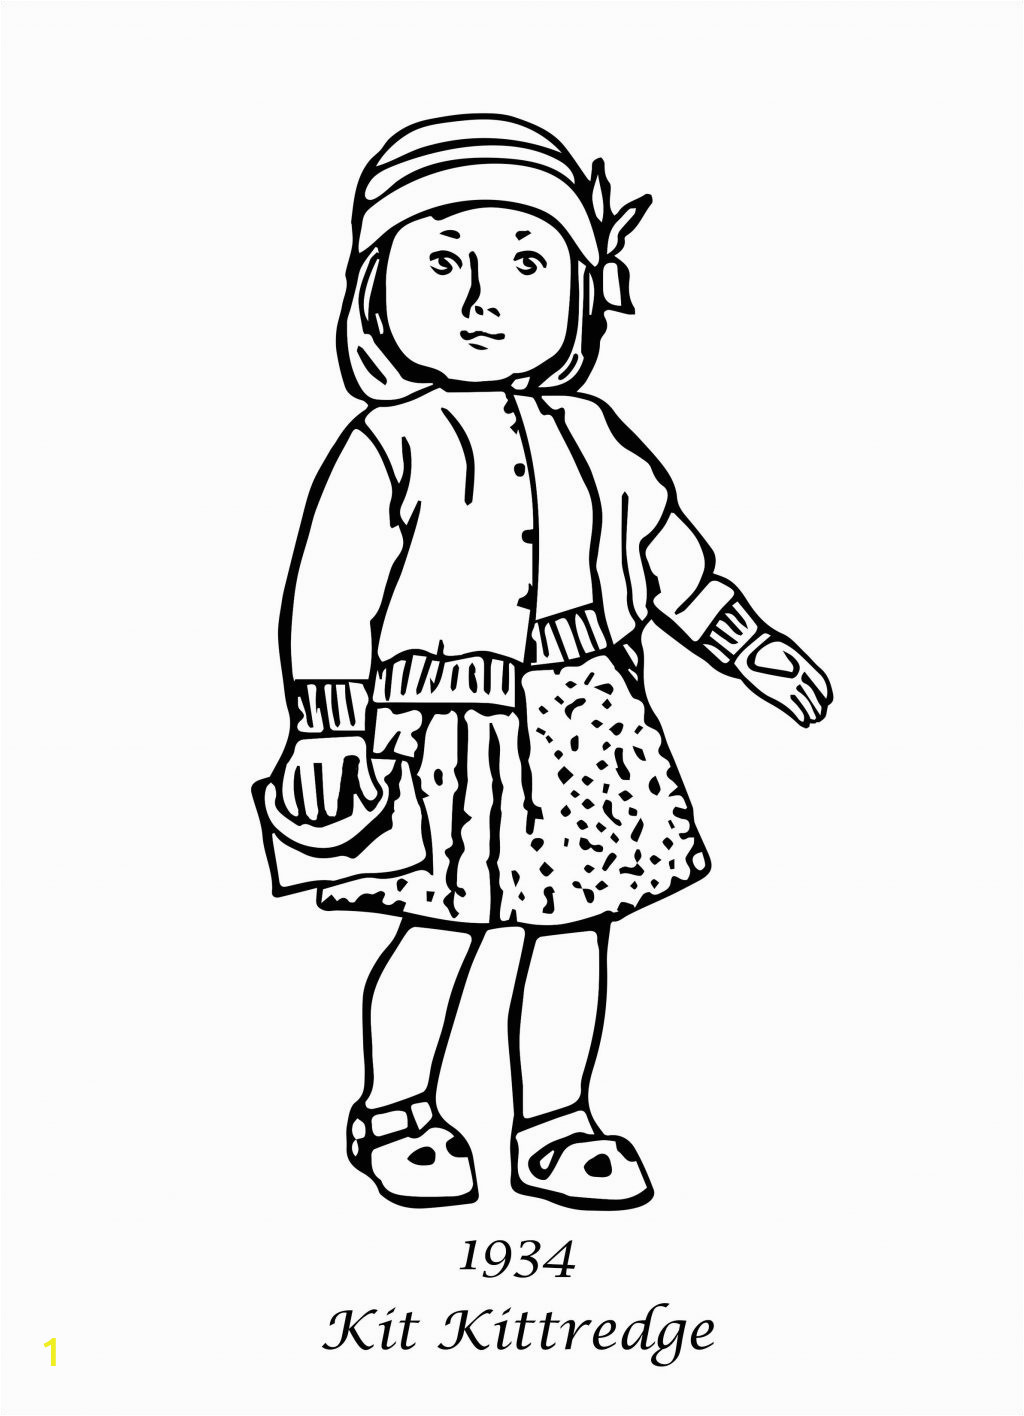 Male Nurse Coloring Pages Coloring Book American Girl Doll Coloring Pages Van Gogh